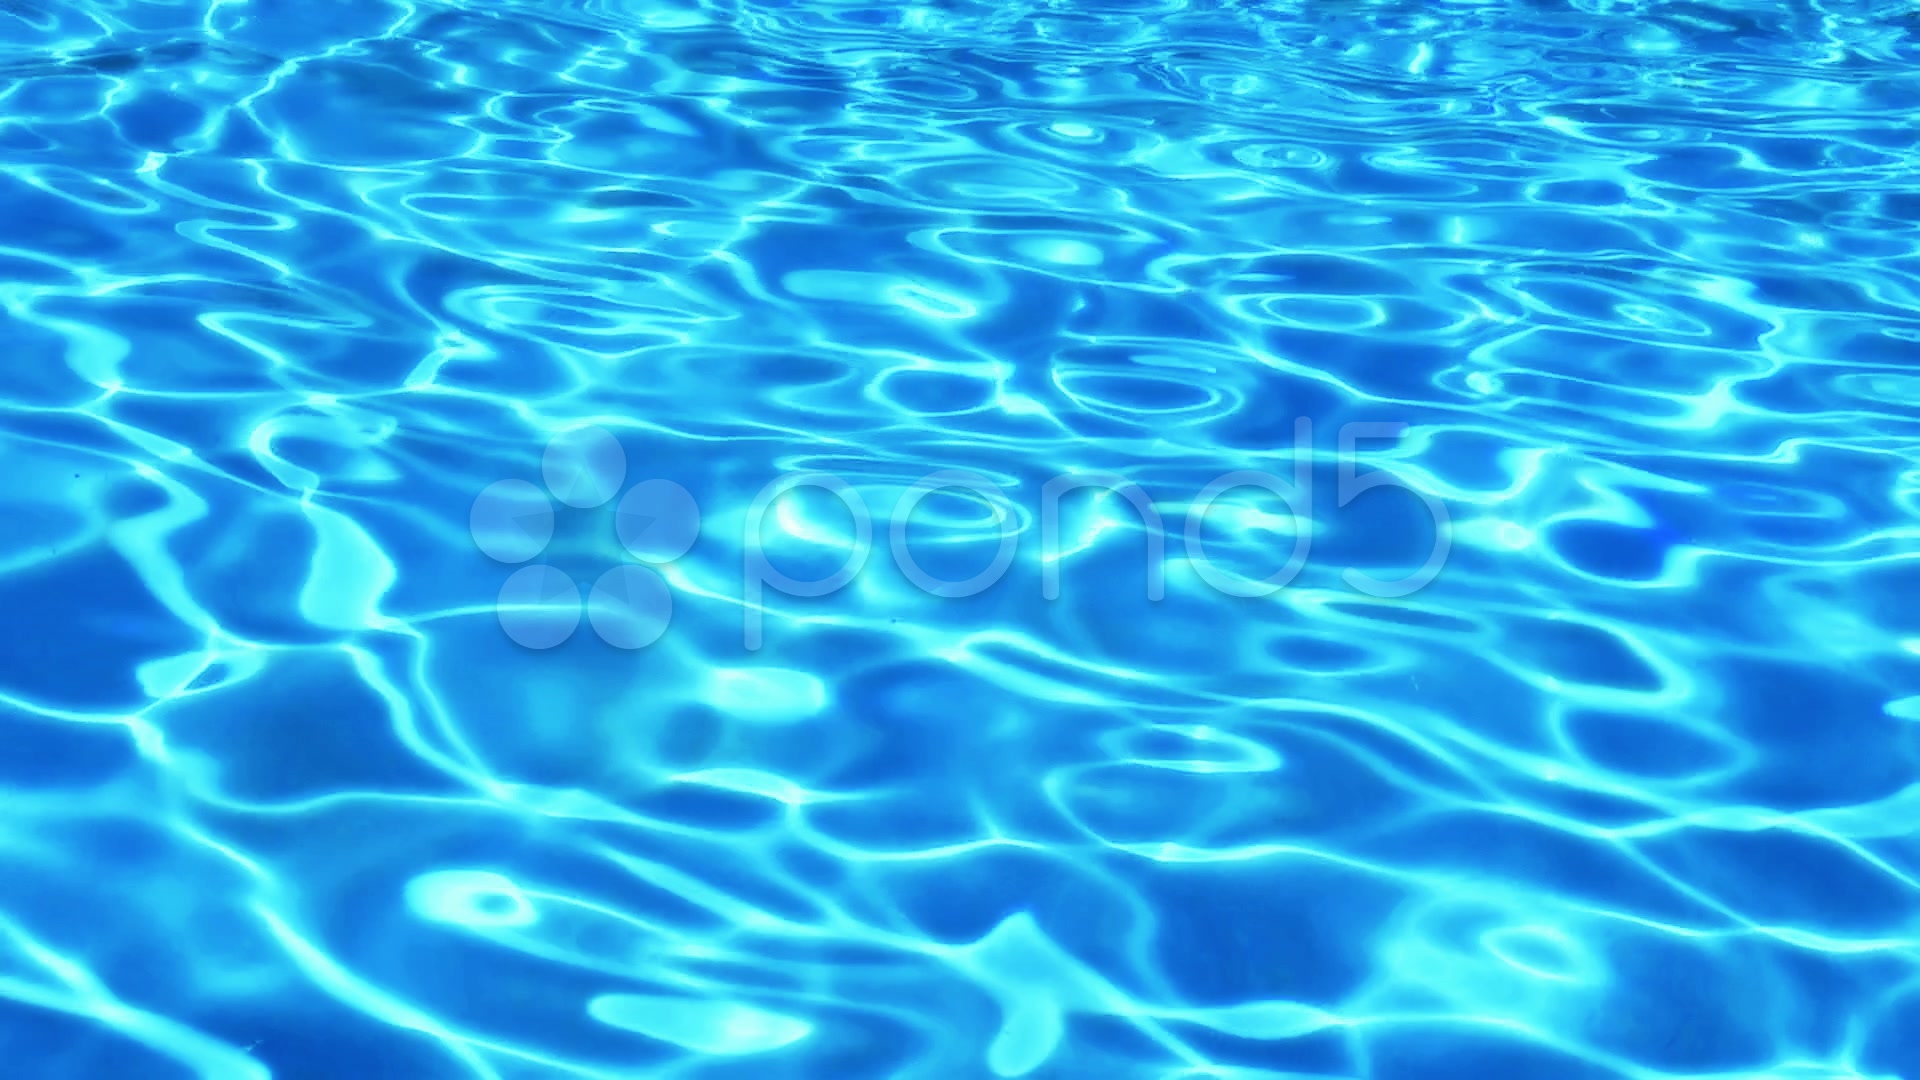 Water Ripple ~ High Resolution ~ Hi Res Video #8506491